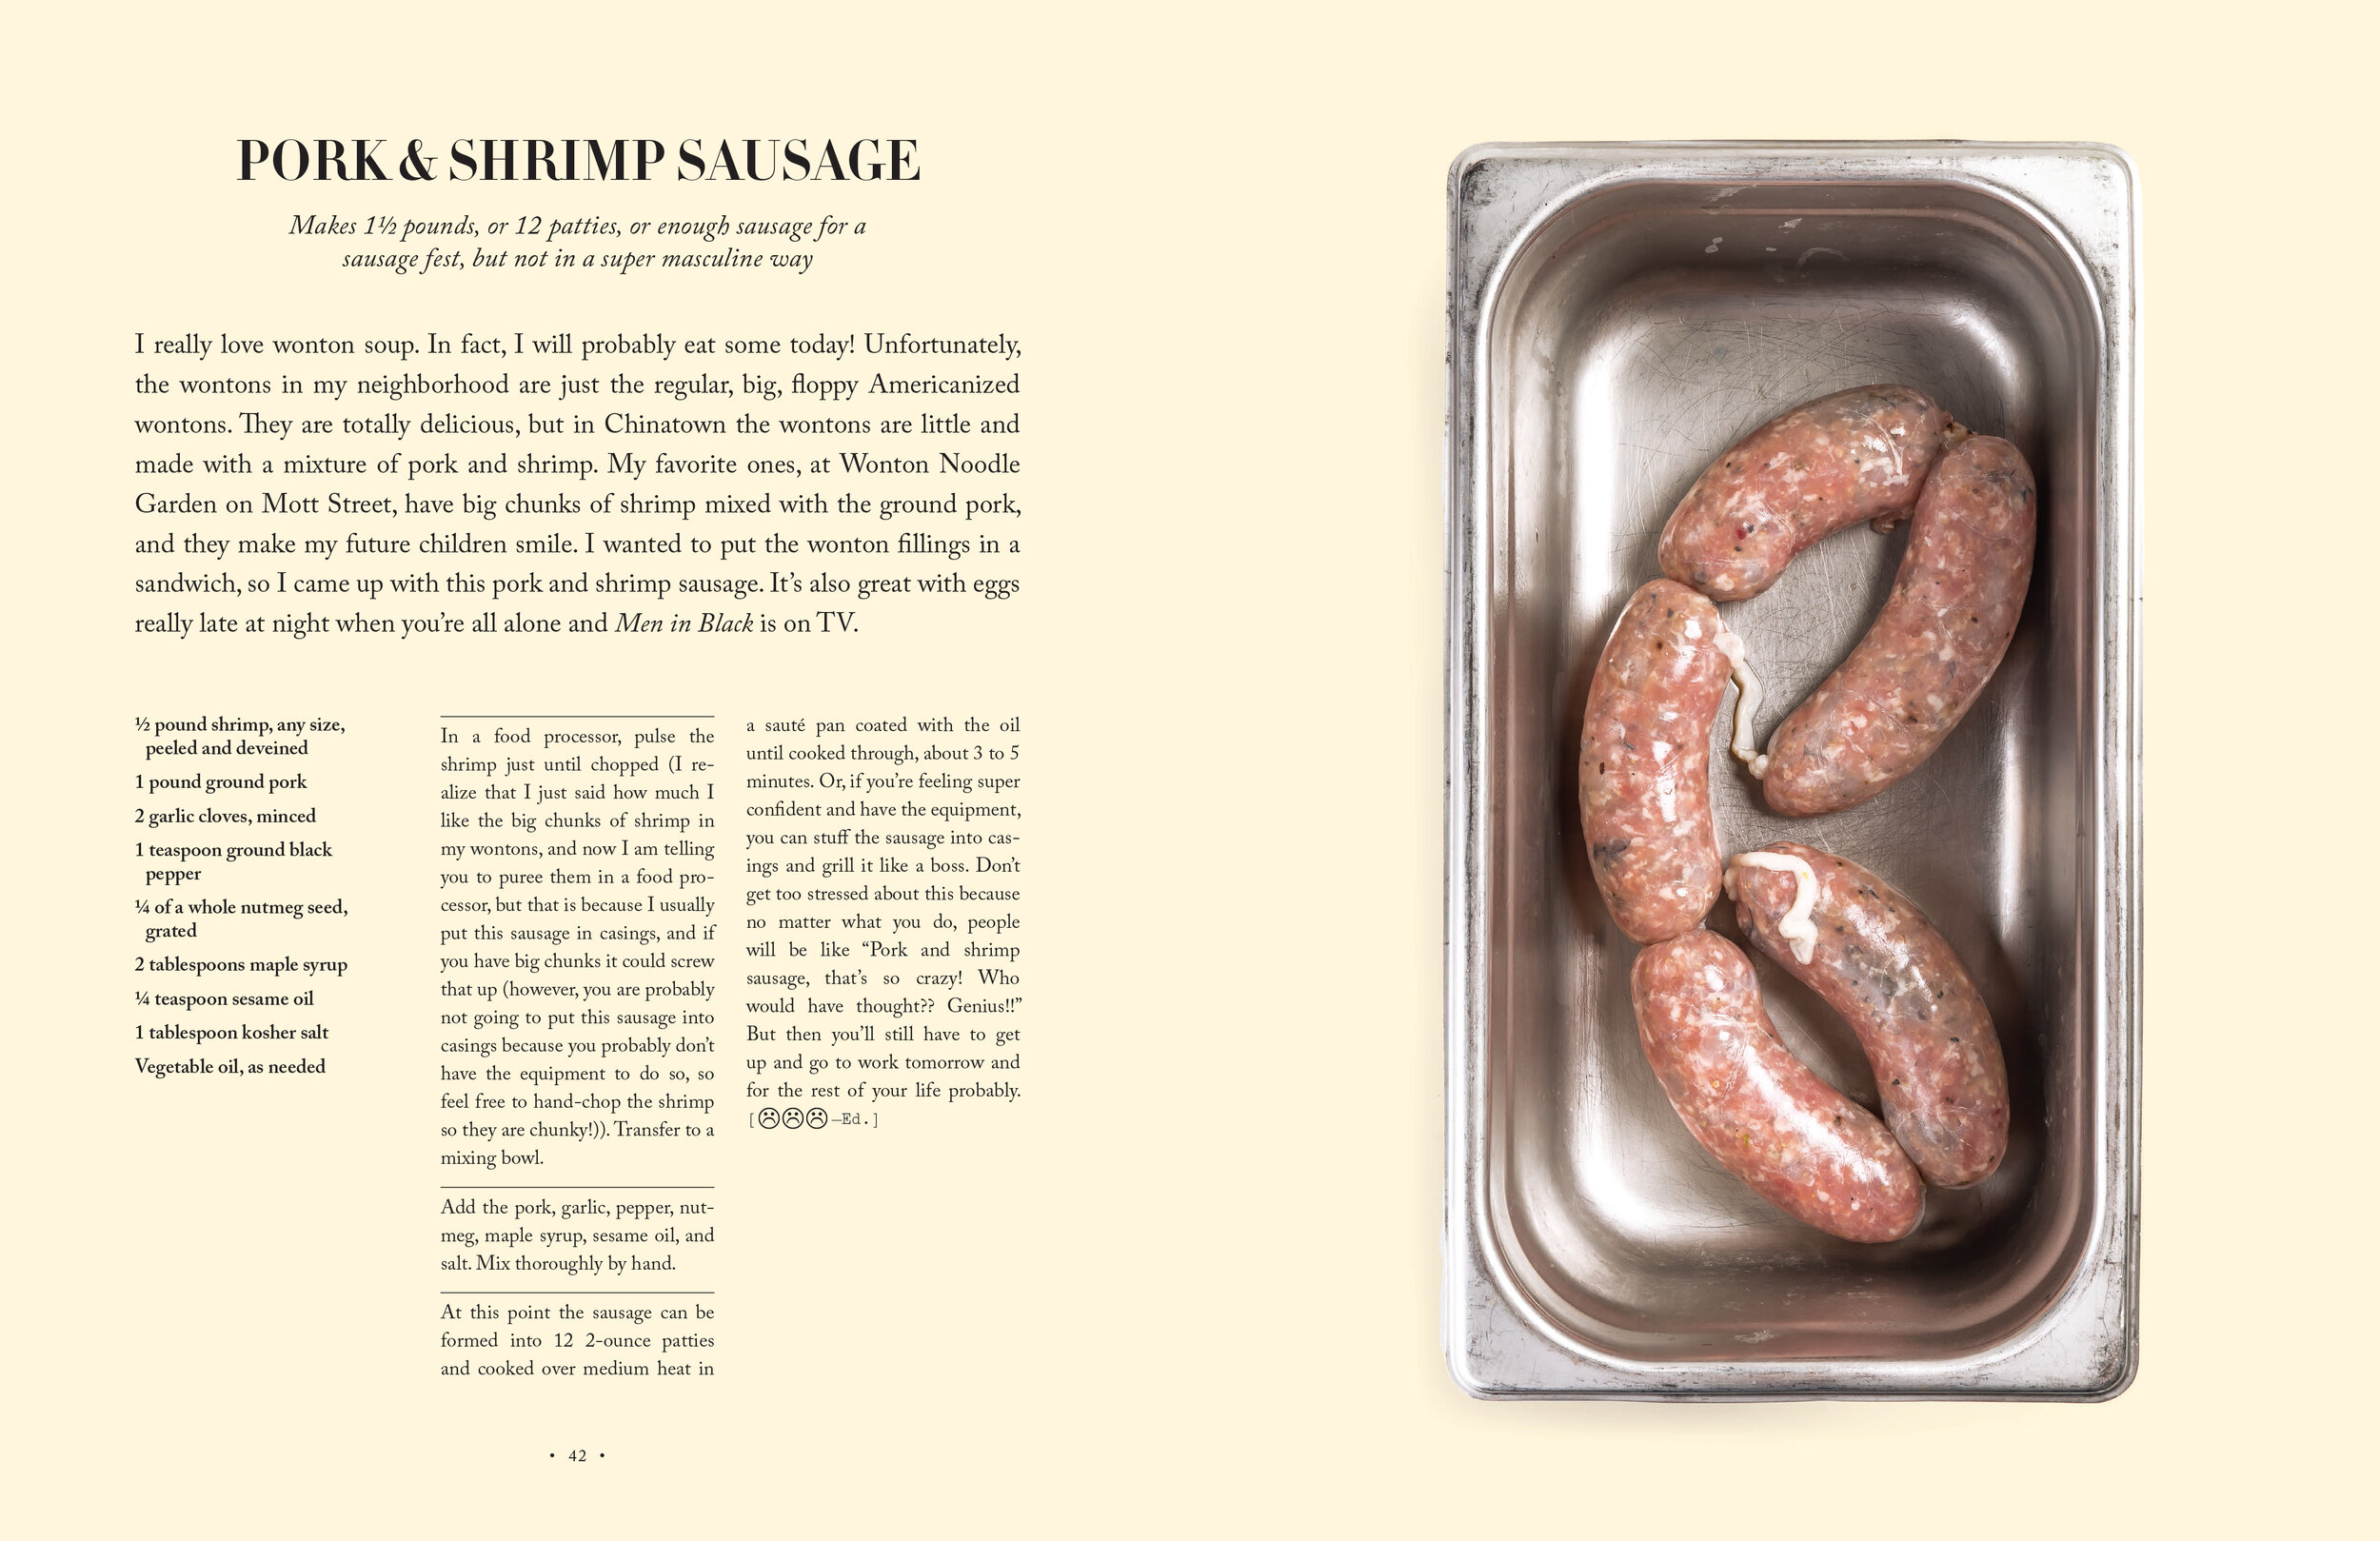 A-Super-Upsetting-Cookbook-About-Sandwiches-7.jpg